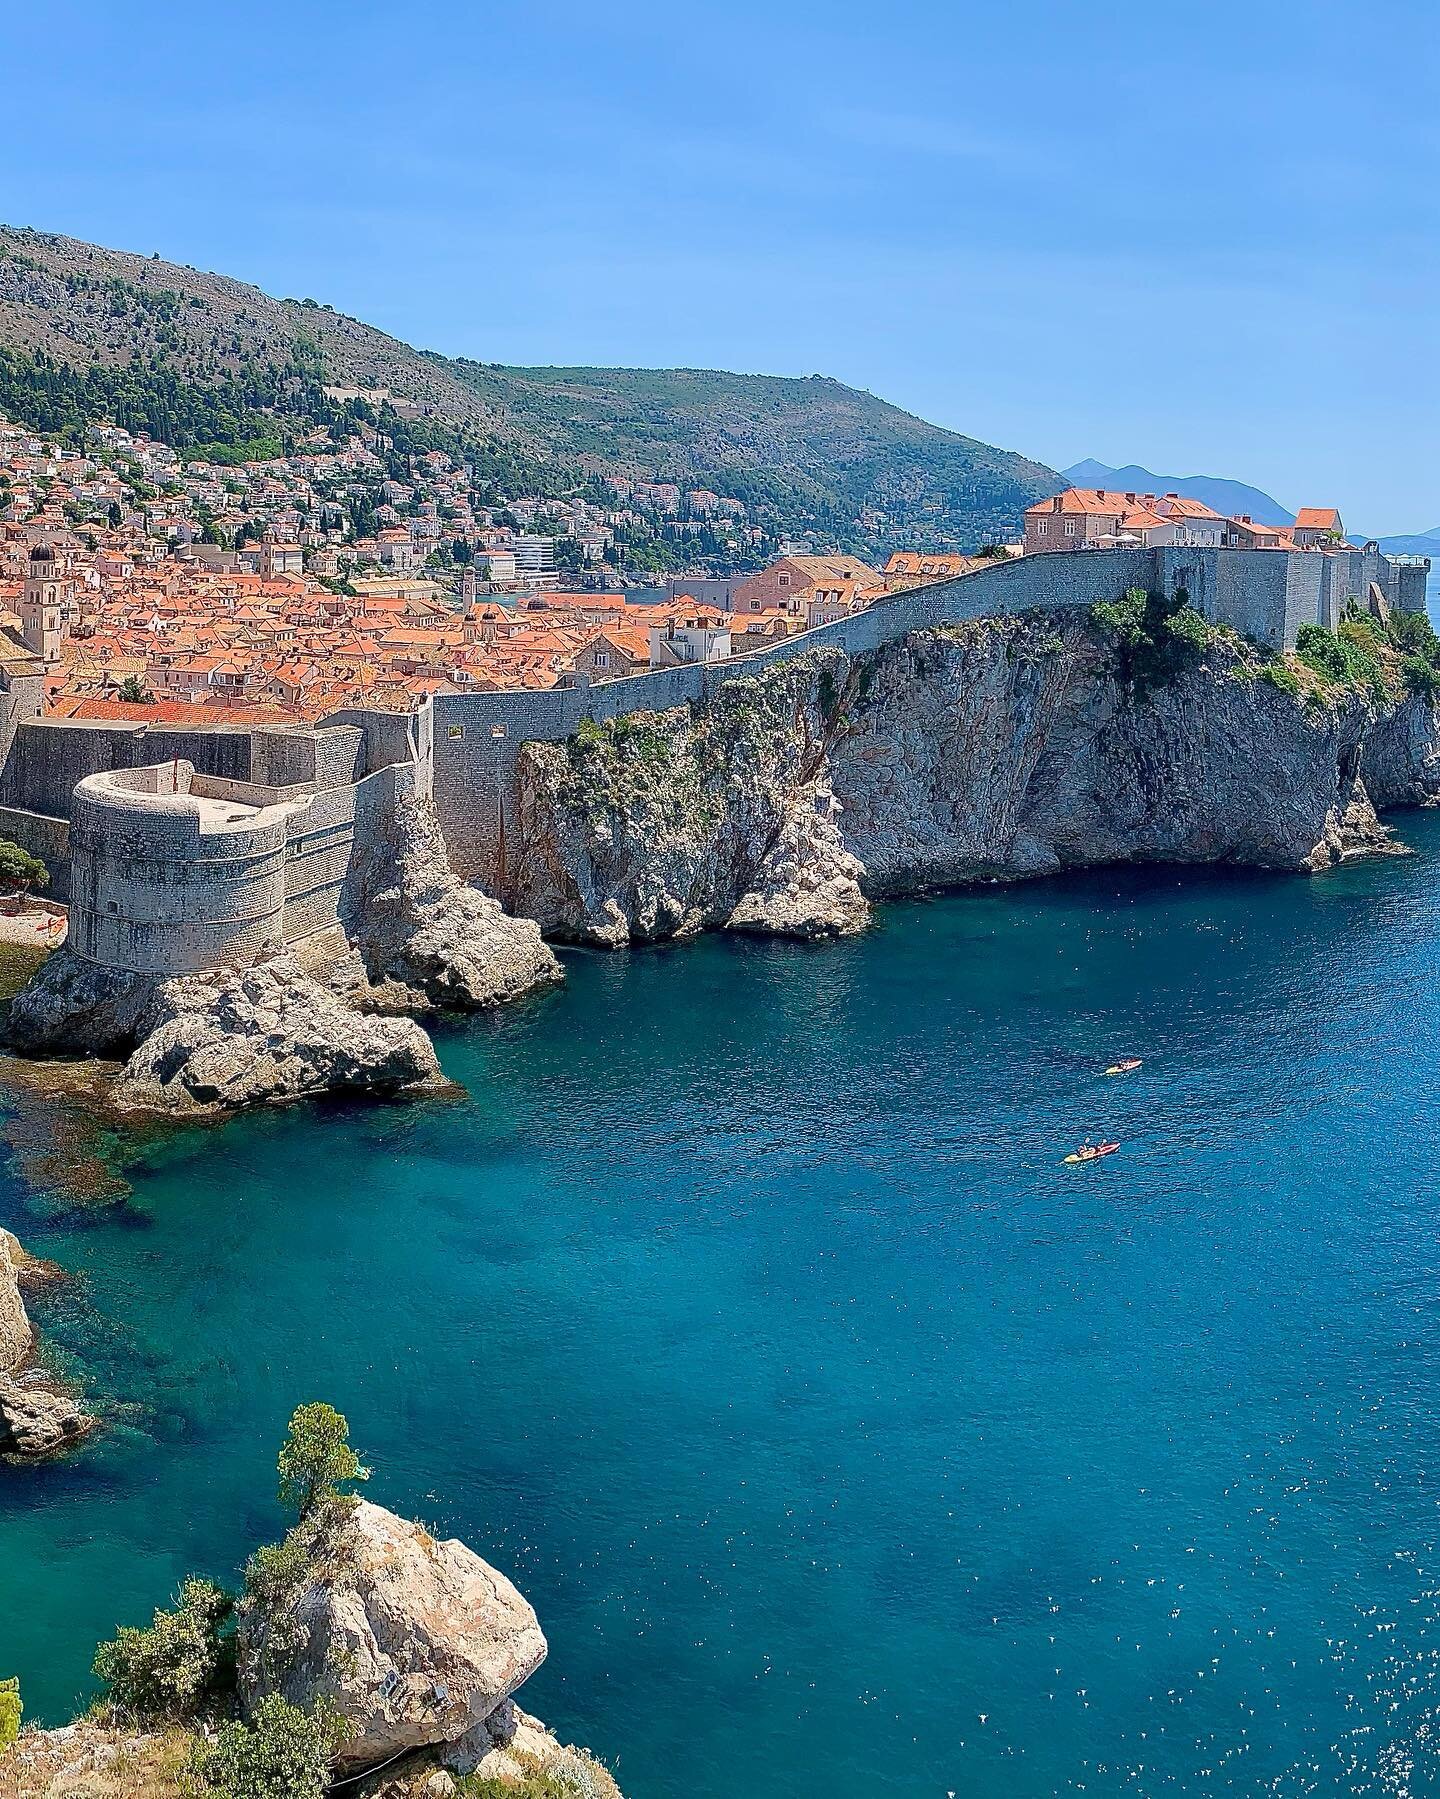 The walled city on the water 🏰
&thinsp;
Dubrovnik was the capital of the Republic of Ragusa (14th to 18th century). It became very wealthy by establishing itself as a well-trusted trade hub in between two powerful neighbors, the Ottomans and the Ven